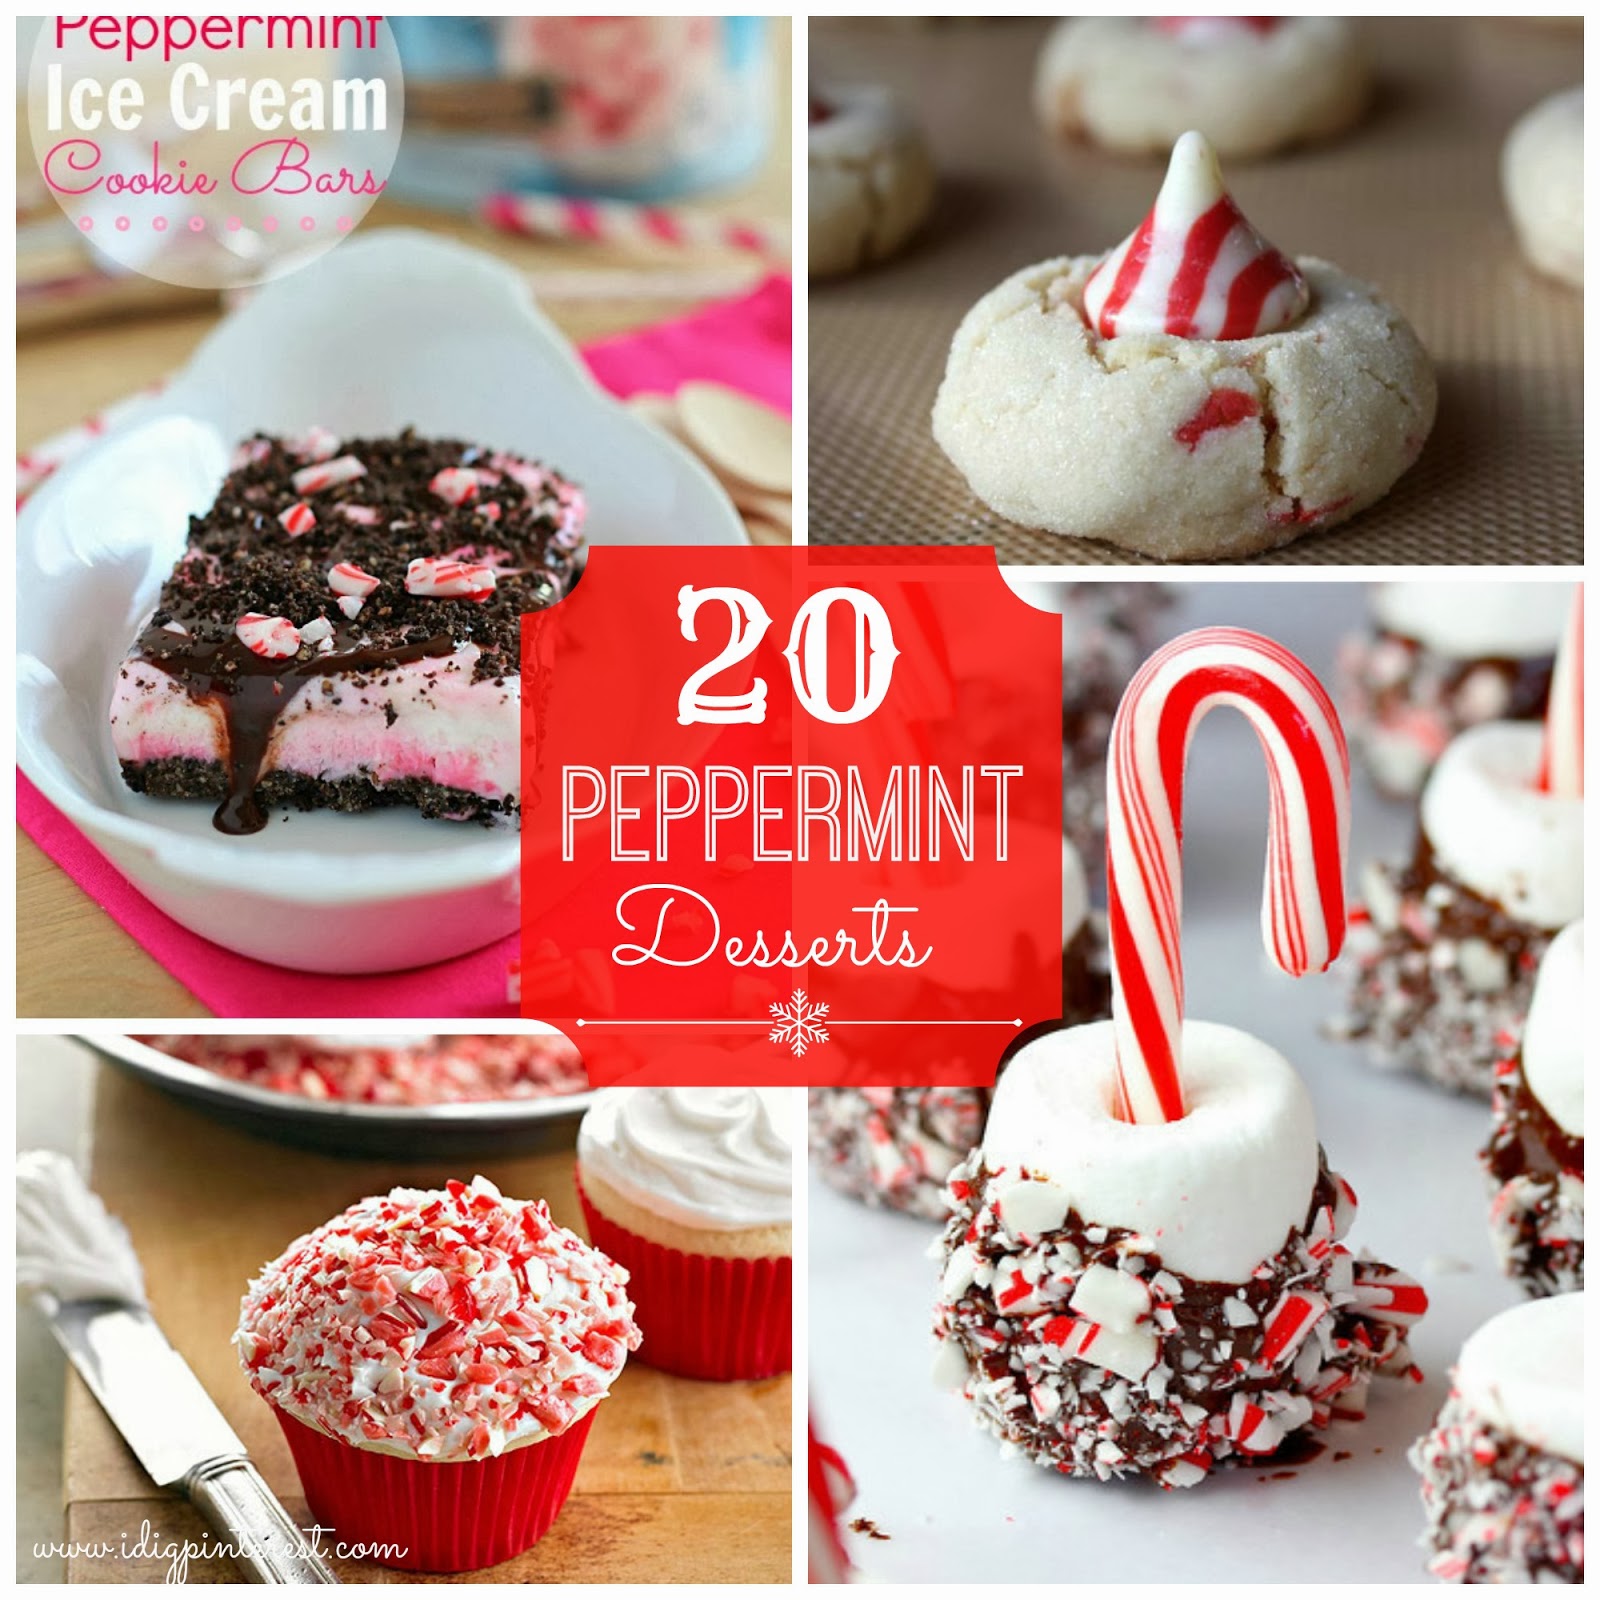 20 Peppermint Desserts for the Holidays - I Dig Pinterest